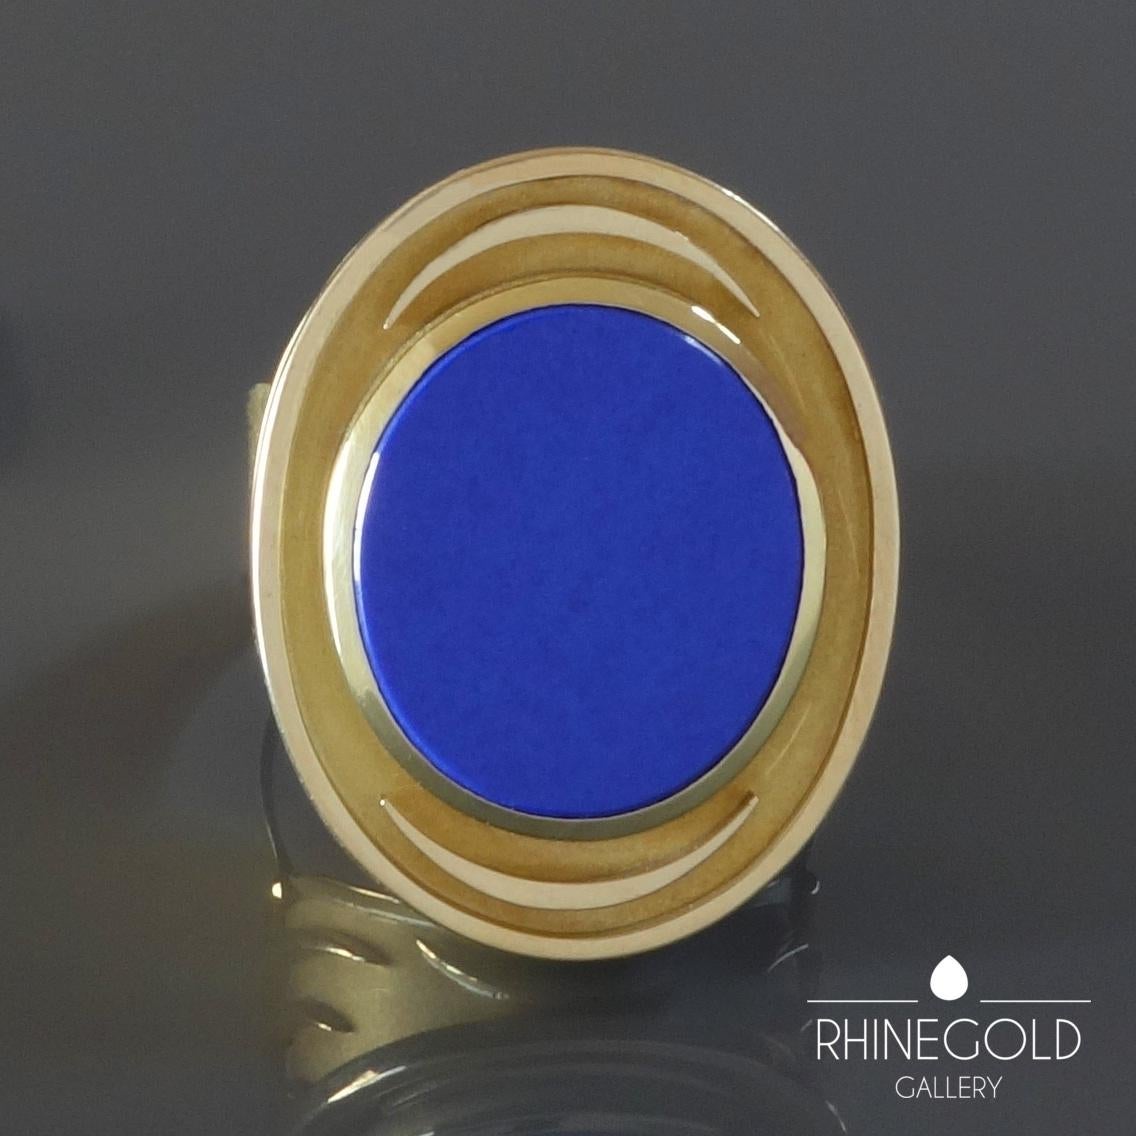 1970s Mid-Century Modernist Lapis Lazuli Gold Gents Men’s Signet Ring
14k yellow gold, lapis lazuli
Ring size: Ø  20.4 mm = EU 64  / US 10 3/4 / ASIA 22.5
Ring head 2.75 cm by 2.2 cm (approx. 1 1/16” by 7/8”
Weight approx. 13.8 grams
Marks: gold